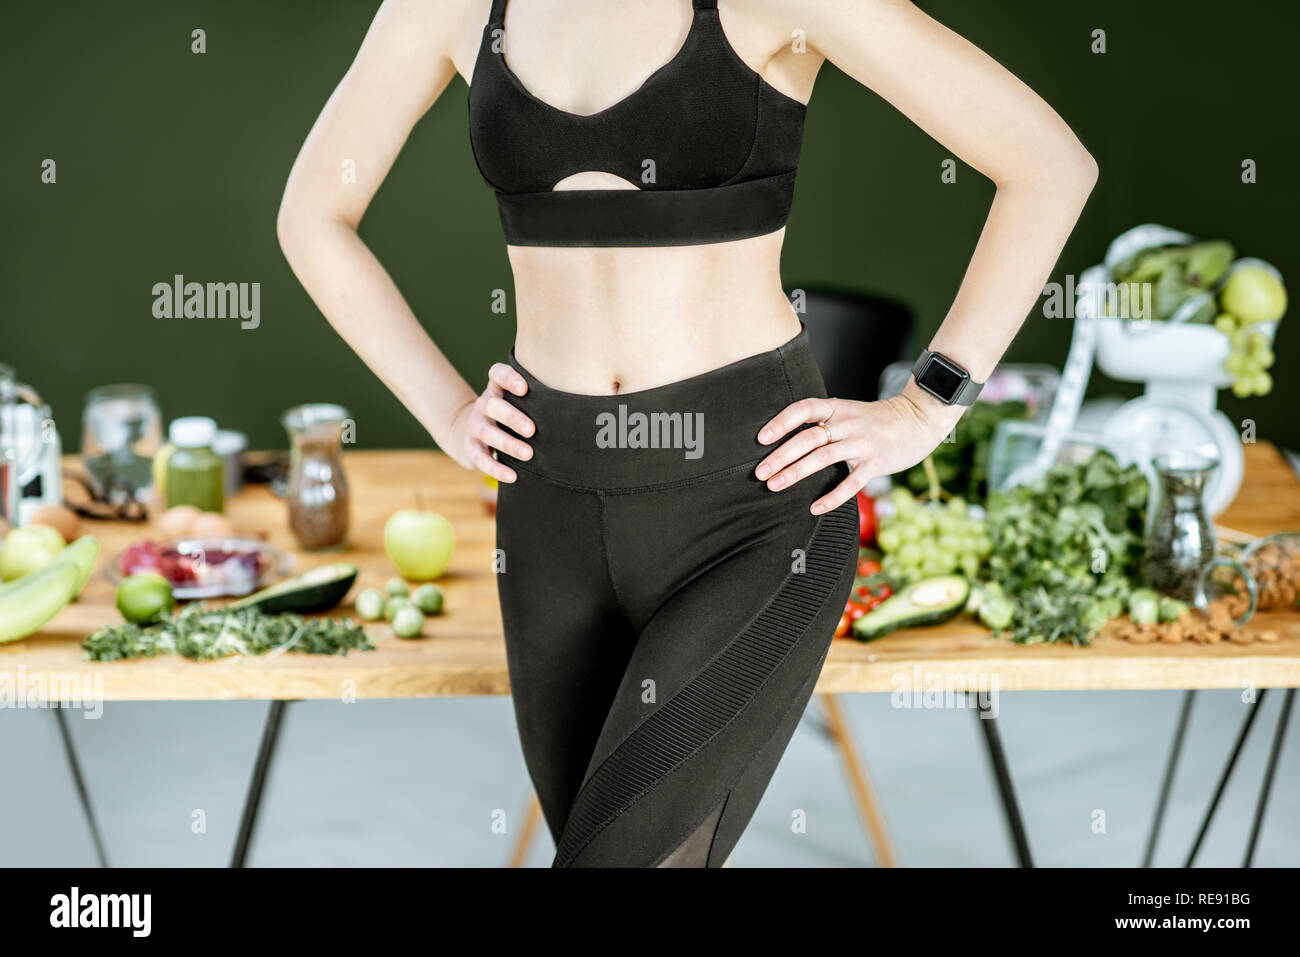 Women's athletic body in sportswear with healthy food on the background. Healthy eating and sports lifestyle concept Stock Photo